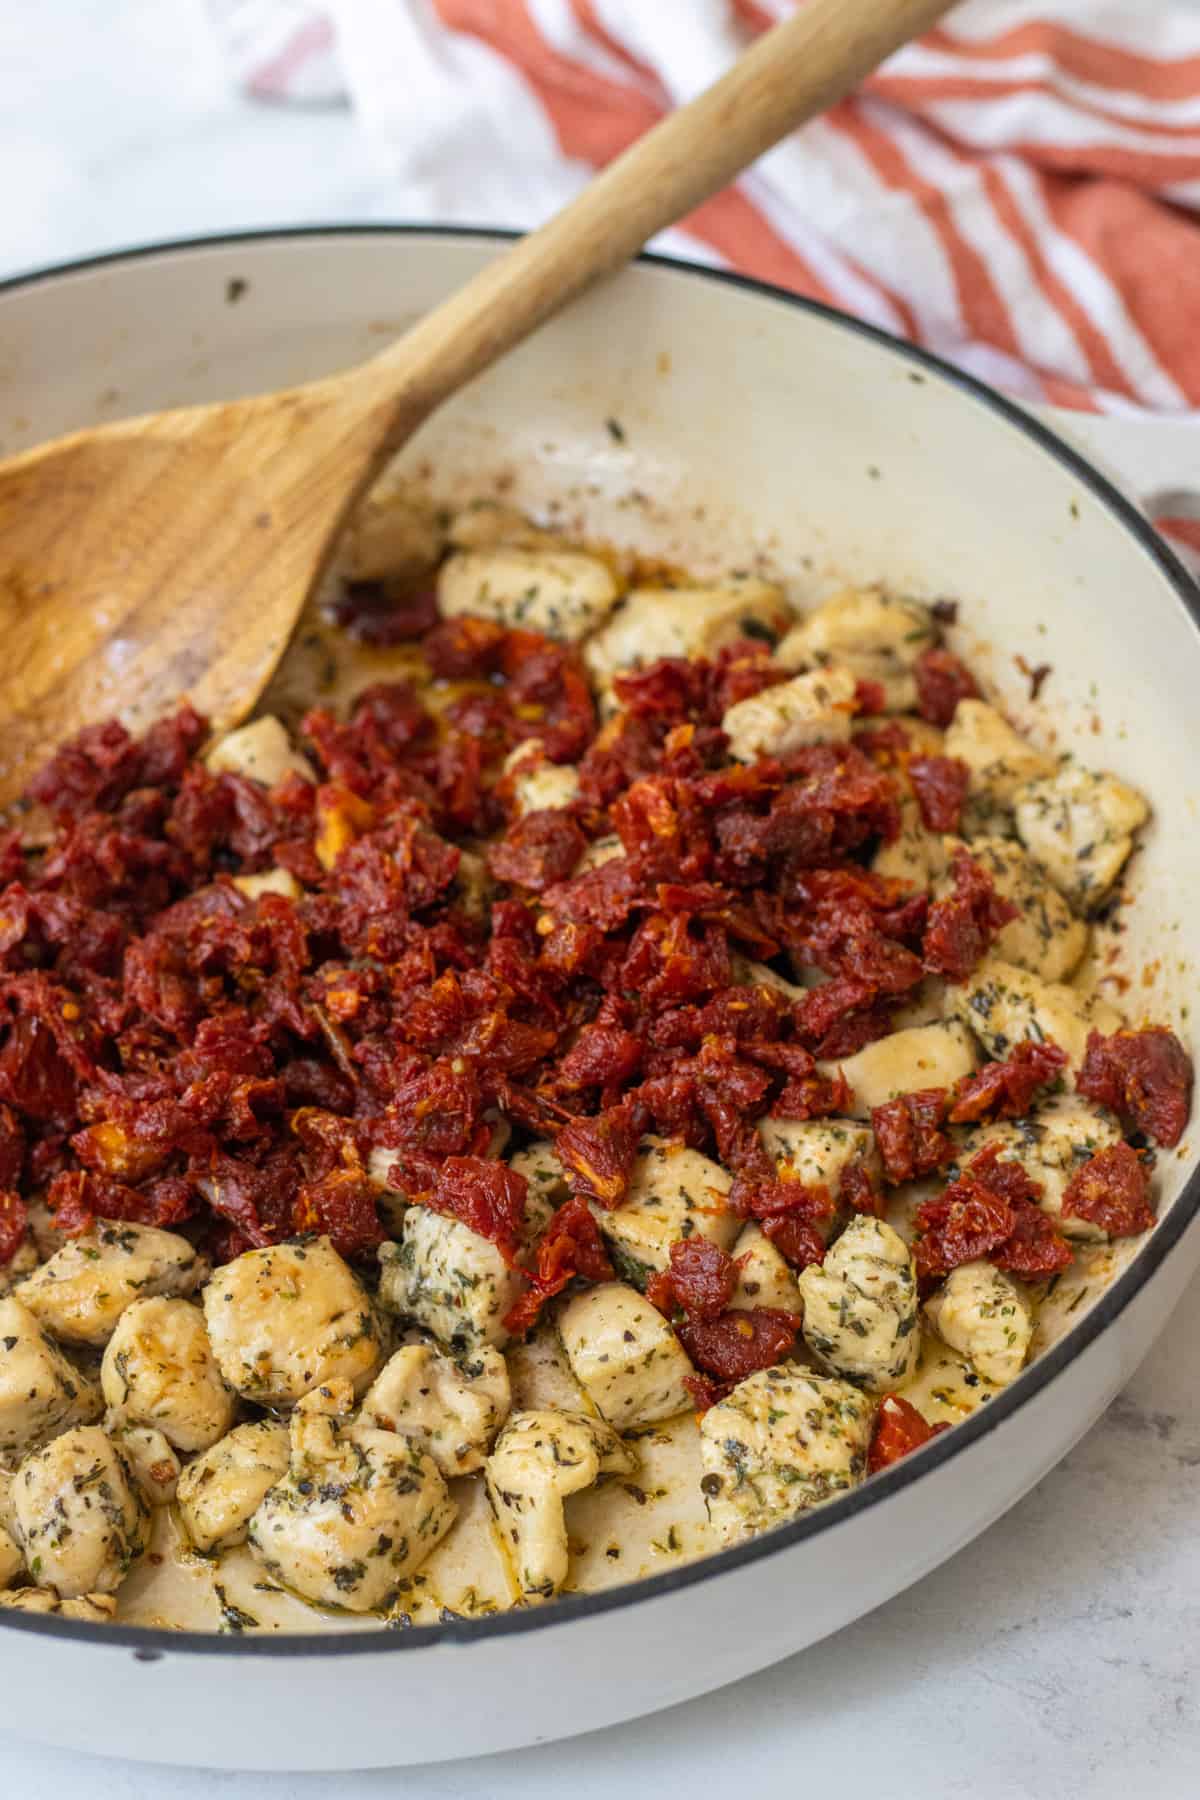 Sun-dried tomatoes in a skillet with cooked chicken and a wooden spoon.